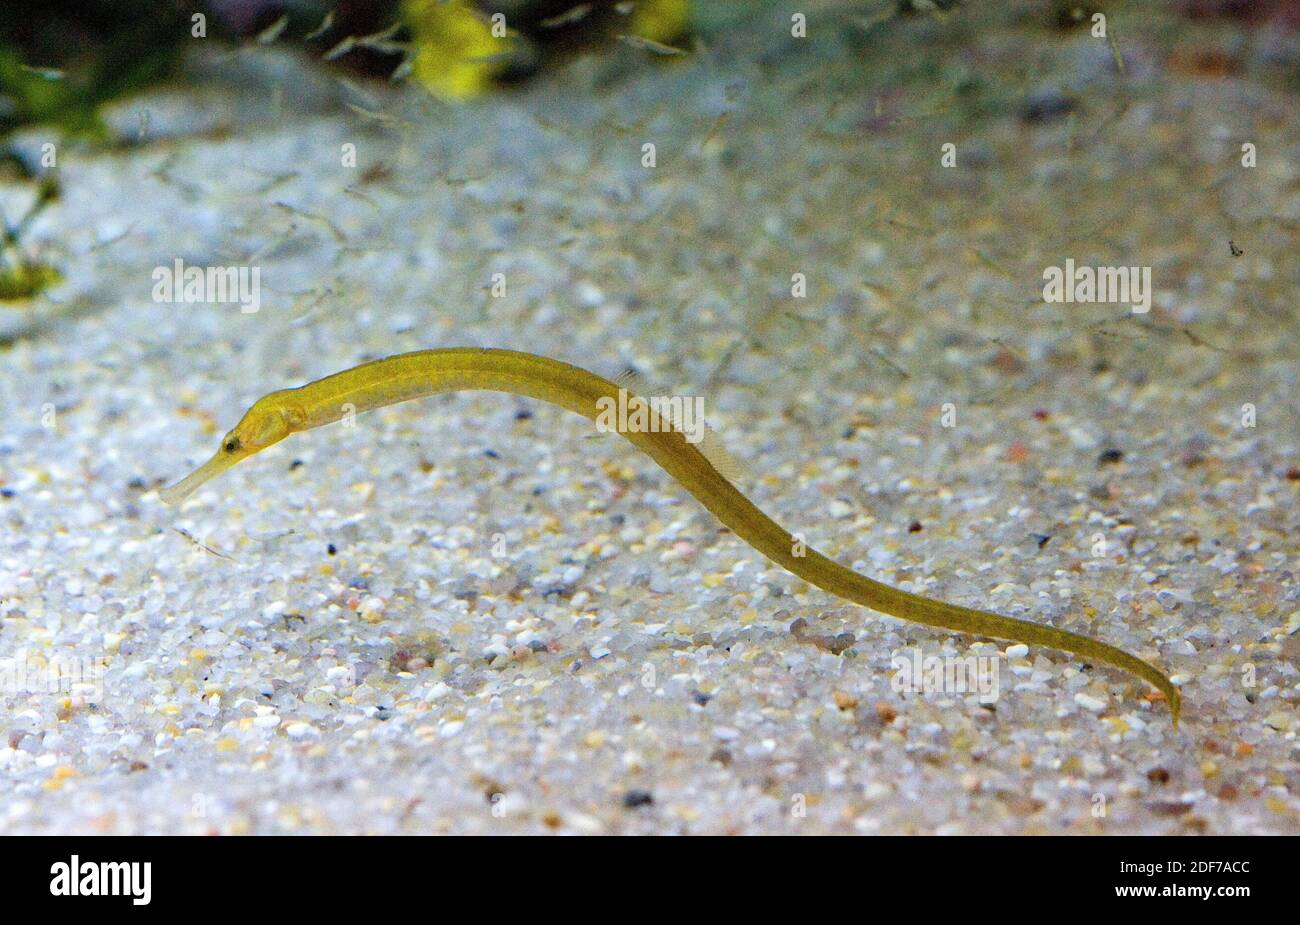 Greater pipefish (Syngnathus acus) is a marine fish native to Mediterranean Sea and atlantic coasts of Europe. Stock Photo